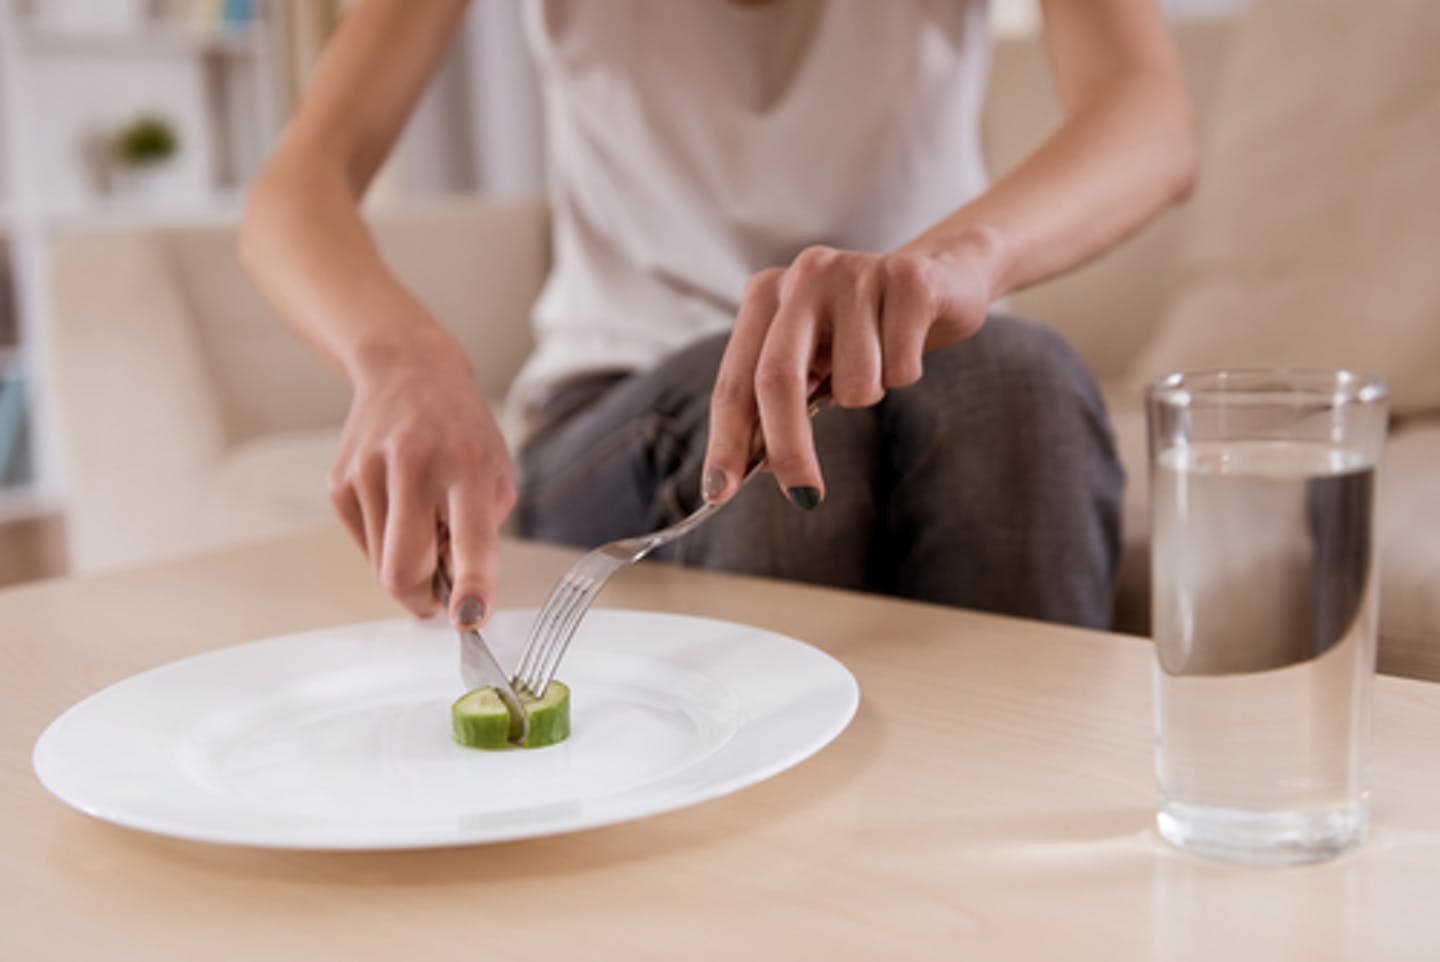 Eating disorders are difficult to overcome, but abandoning diets is crucial